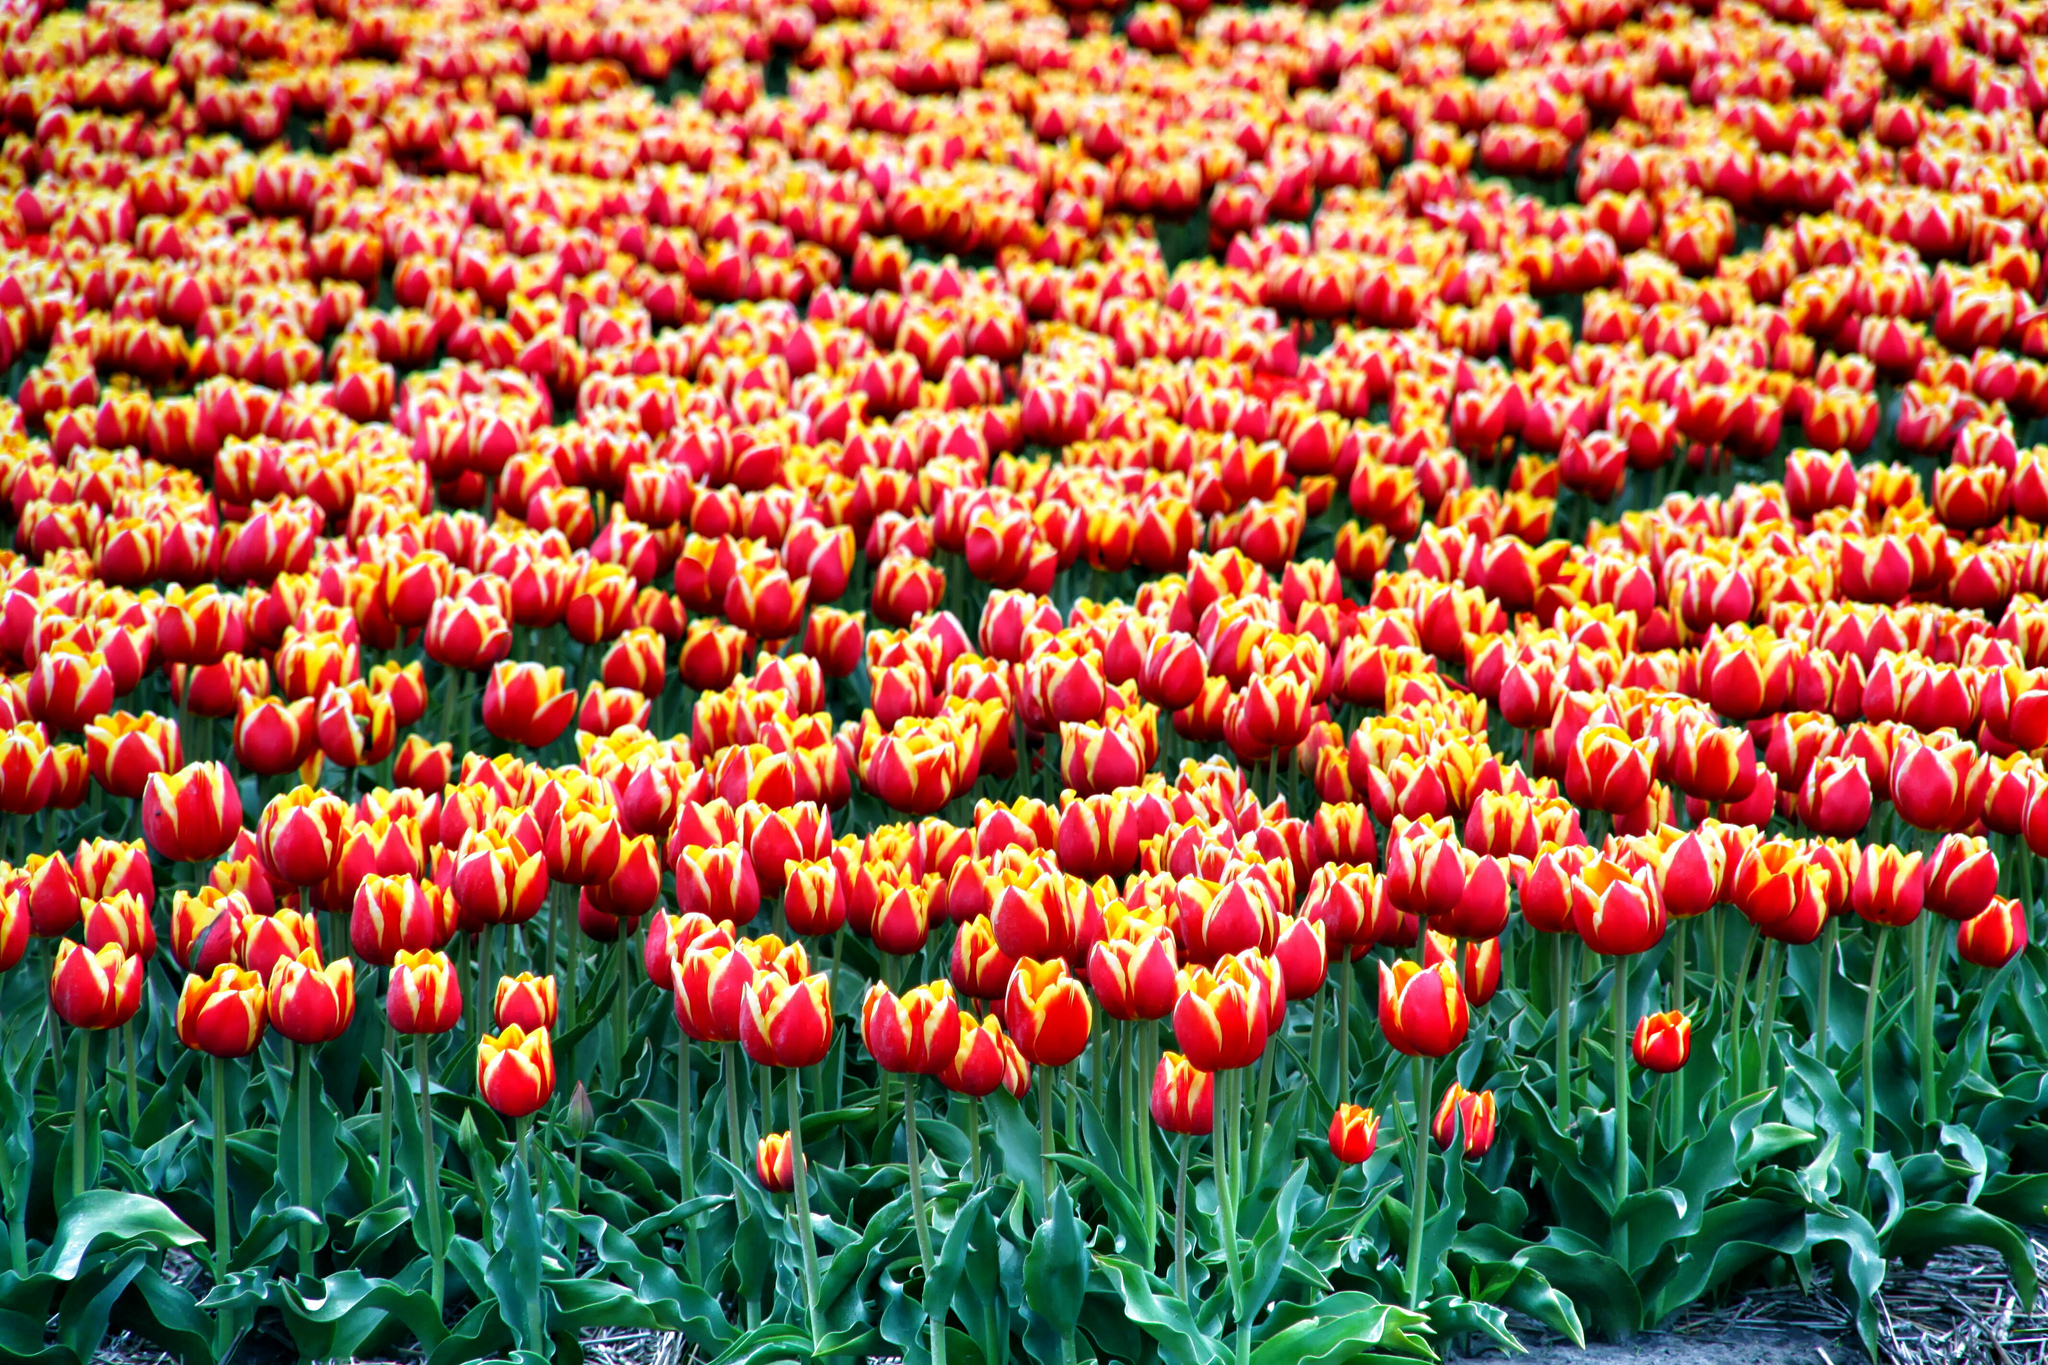 A field of tulips in North Holland, Netherlands